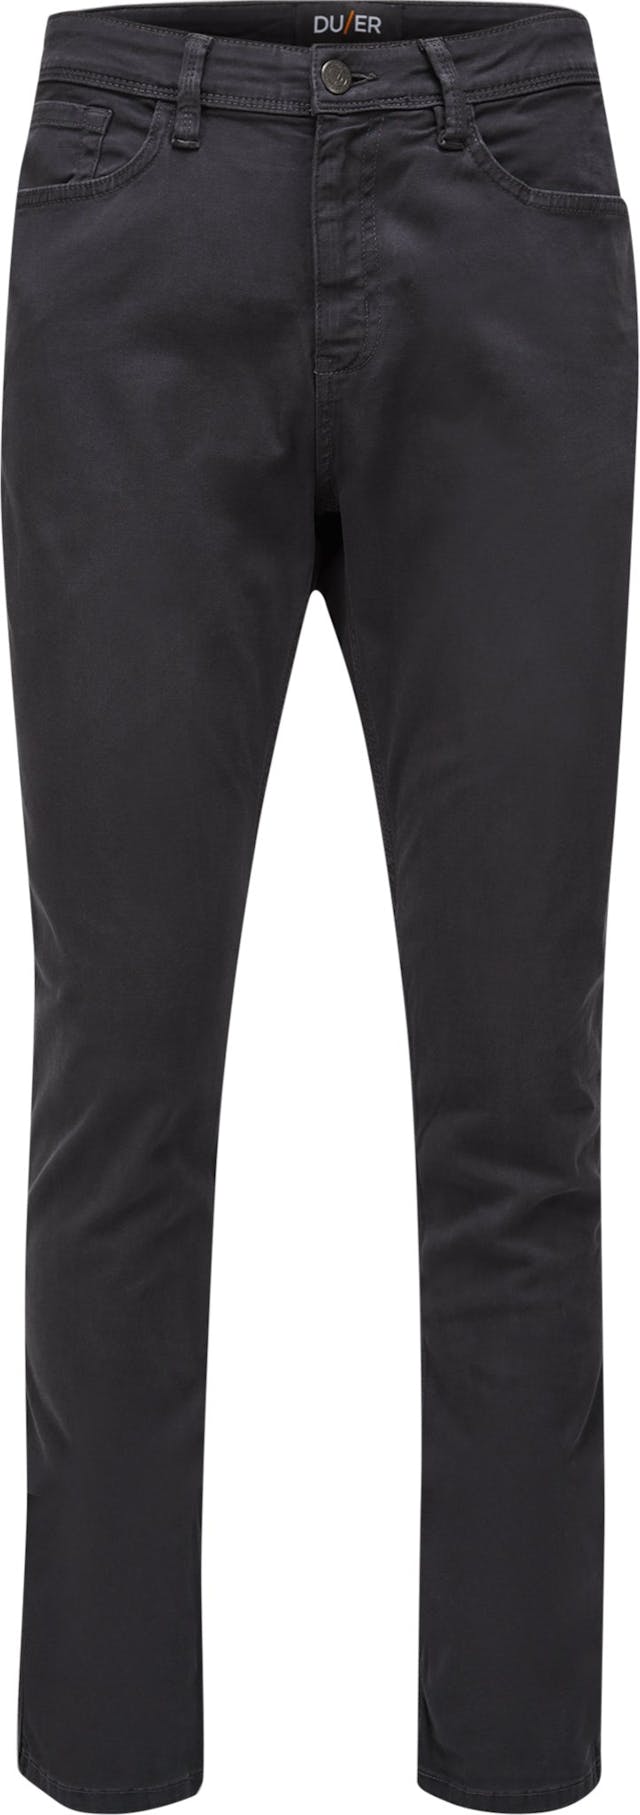 Product image for Live Lite Relaxed Taper Pants - Men's